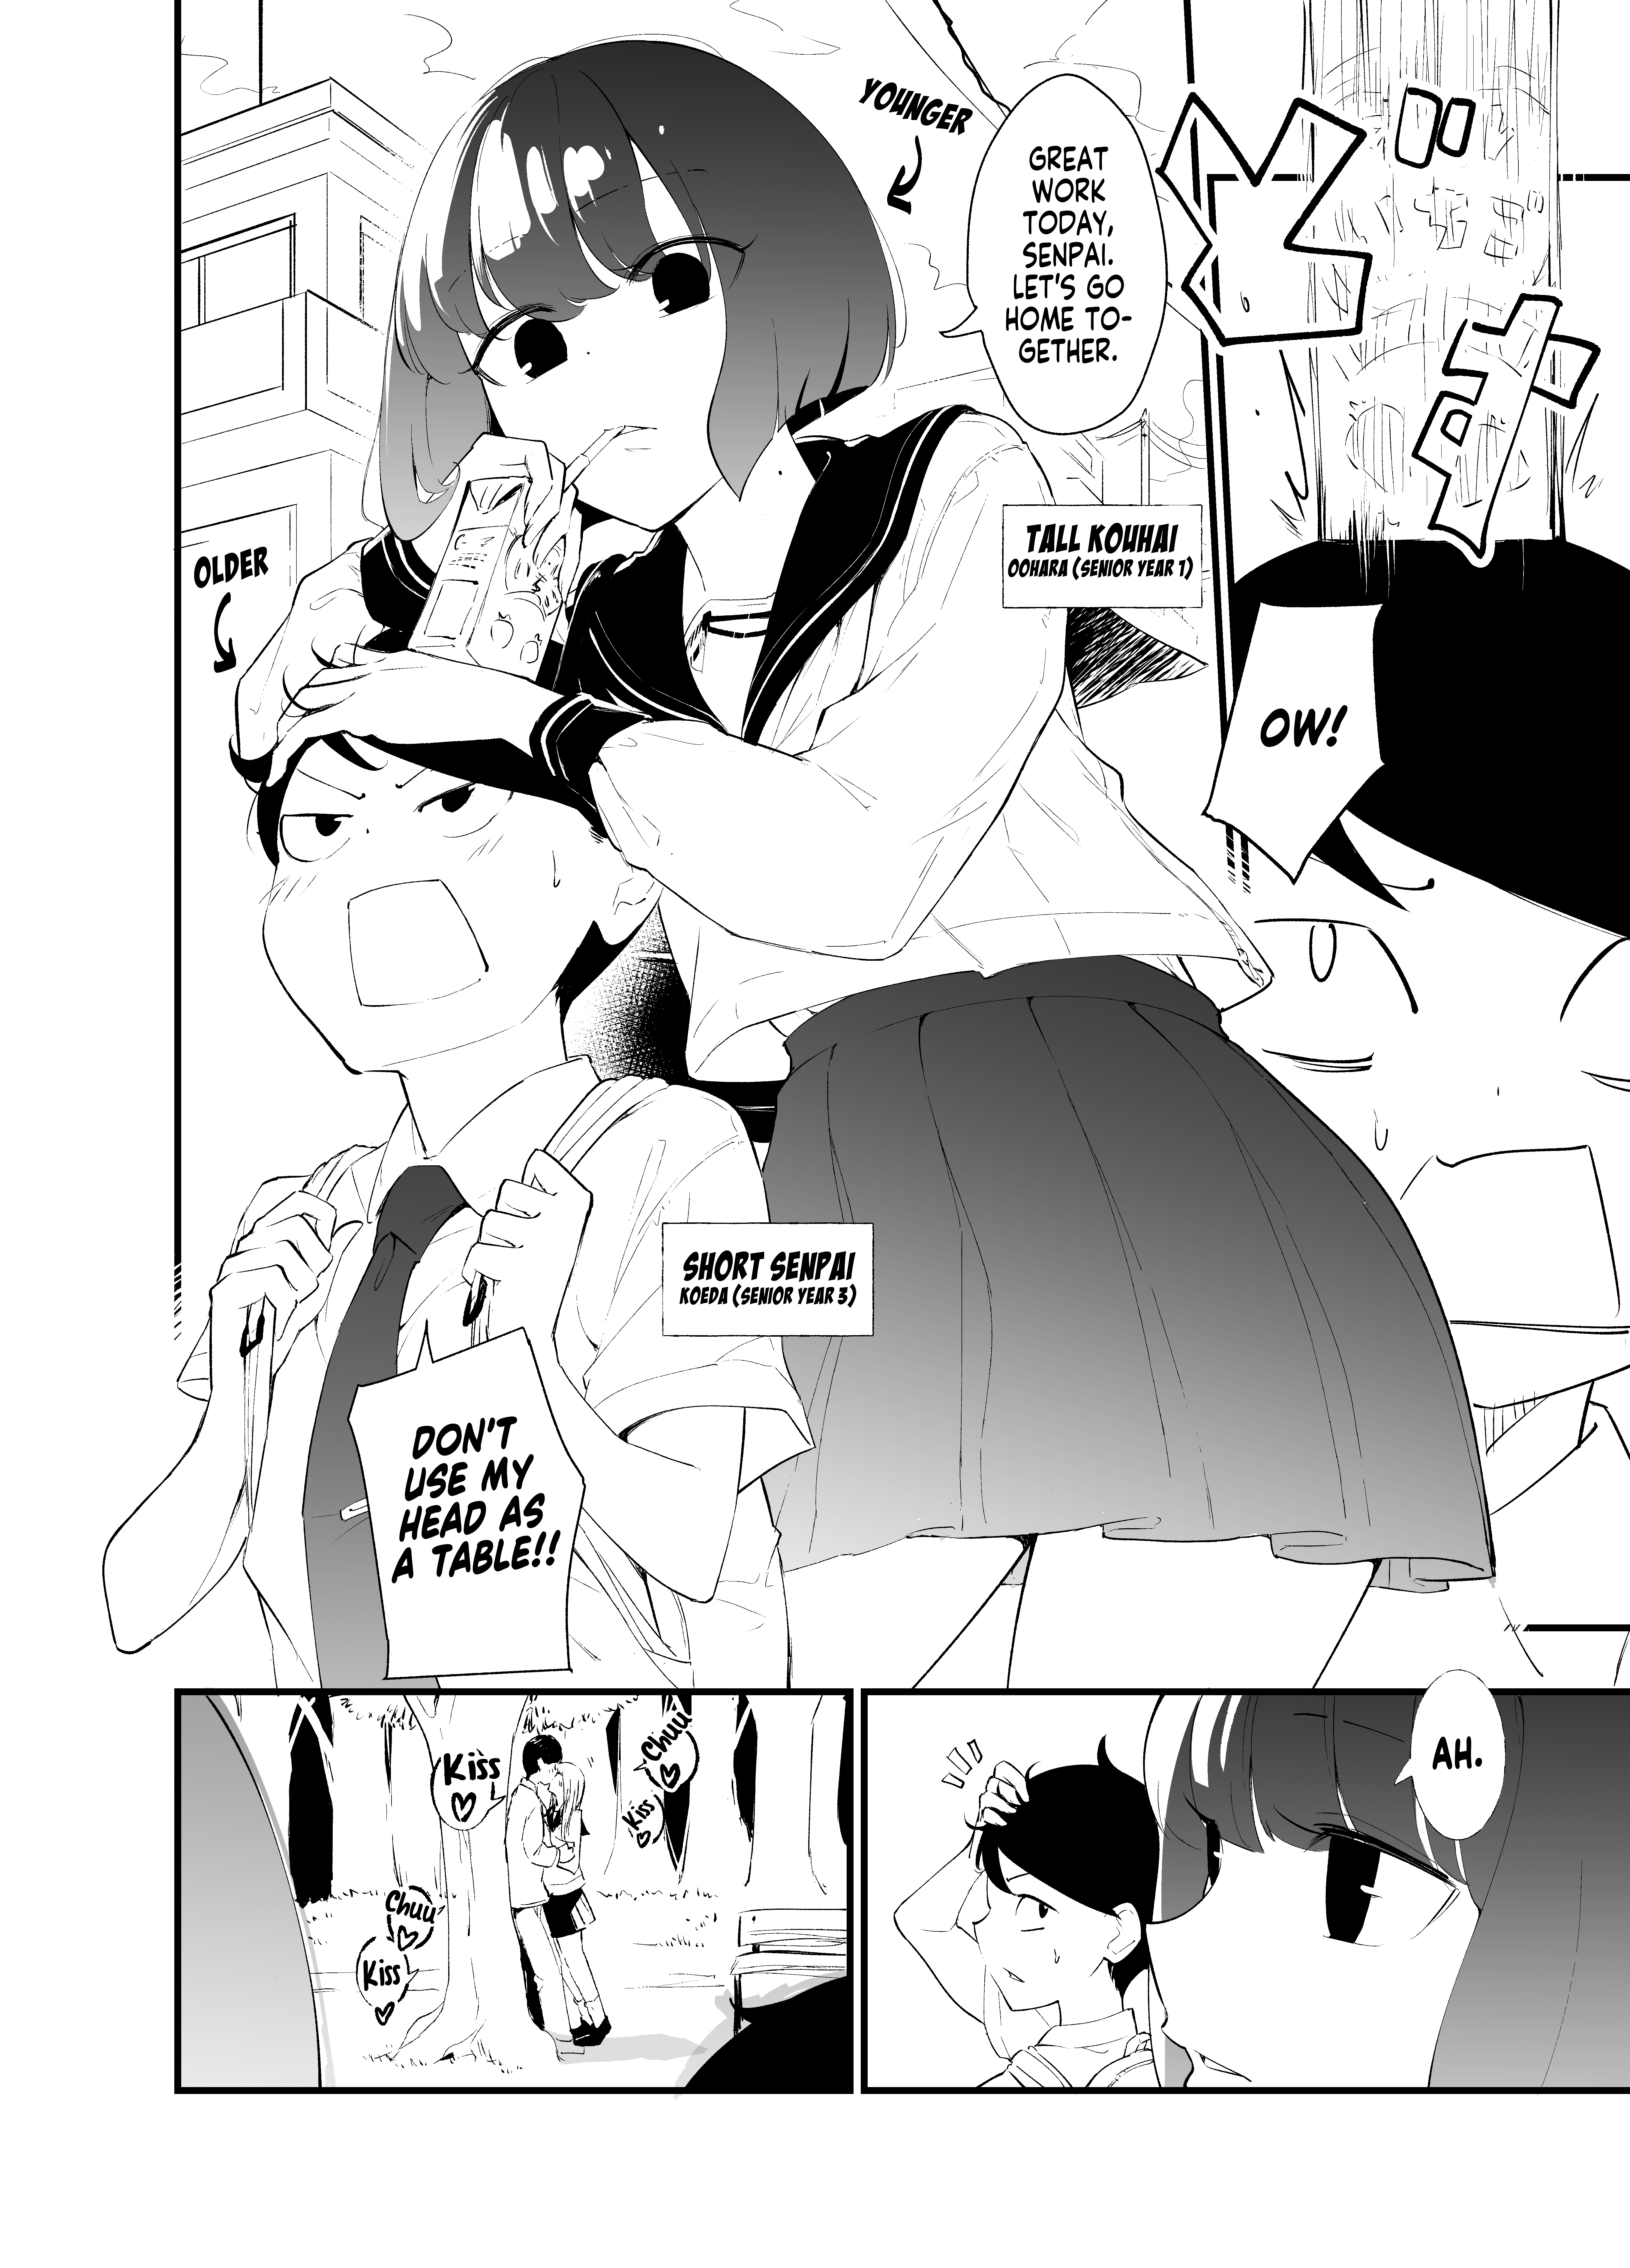 Until The Tall Kouhai (♀) And The Short Senpai (♂) Relationship Develops Into Romance chapter 3 - page 1